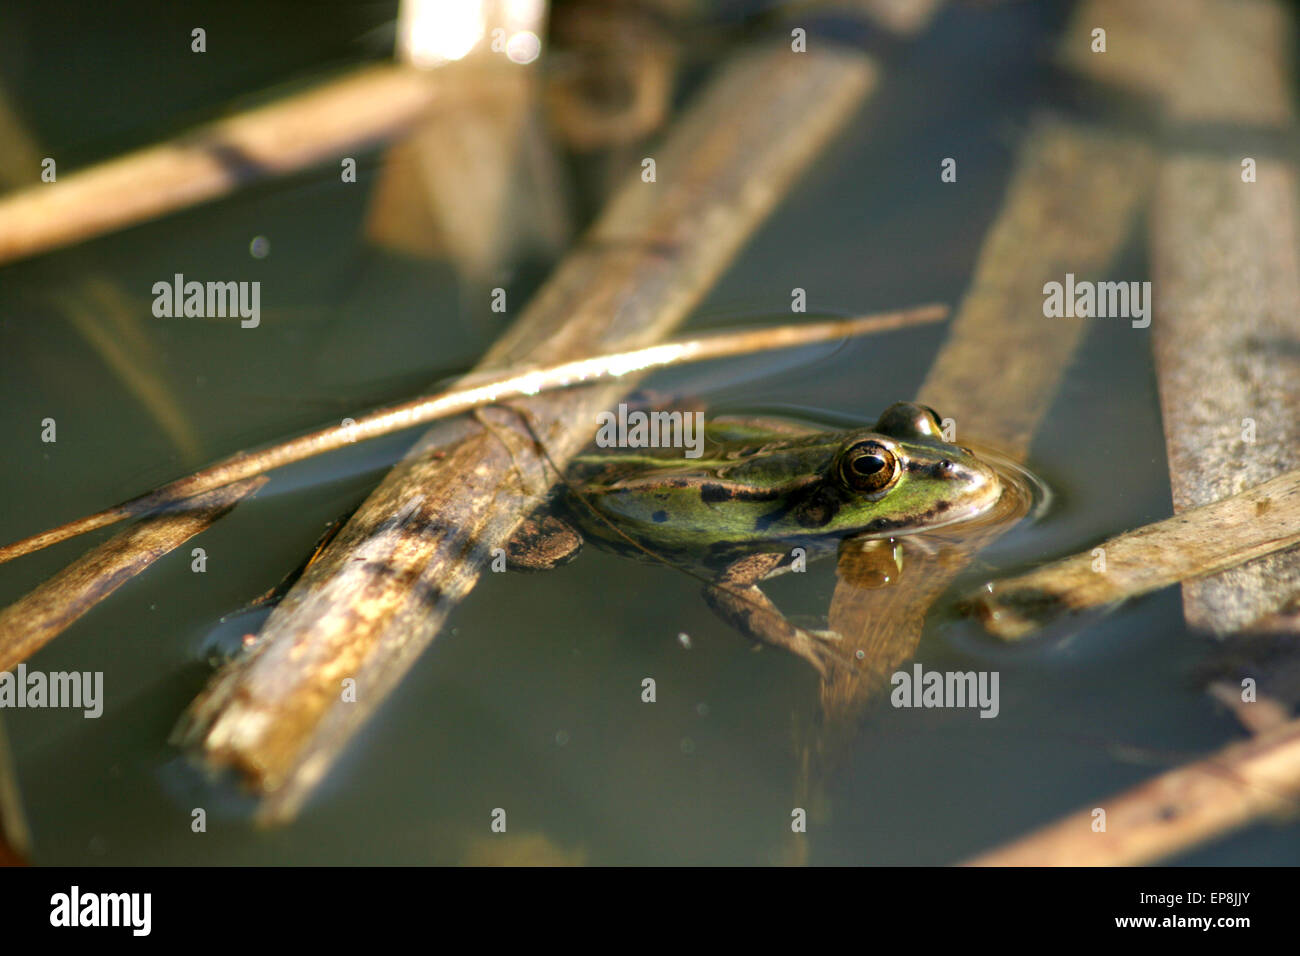 Frog in natural environment Stock Photo